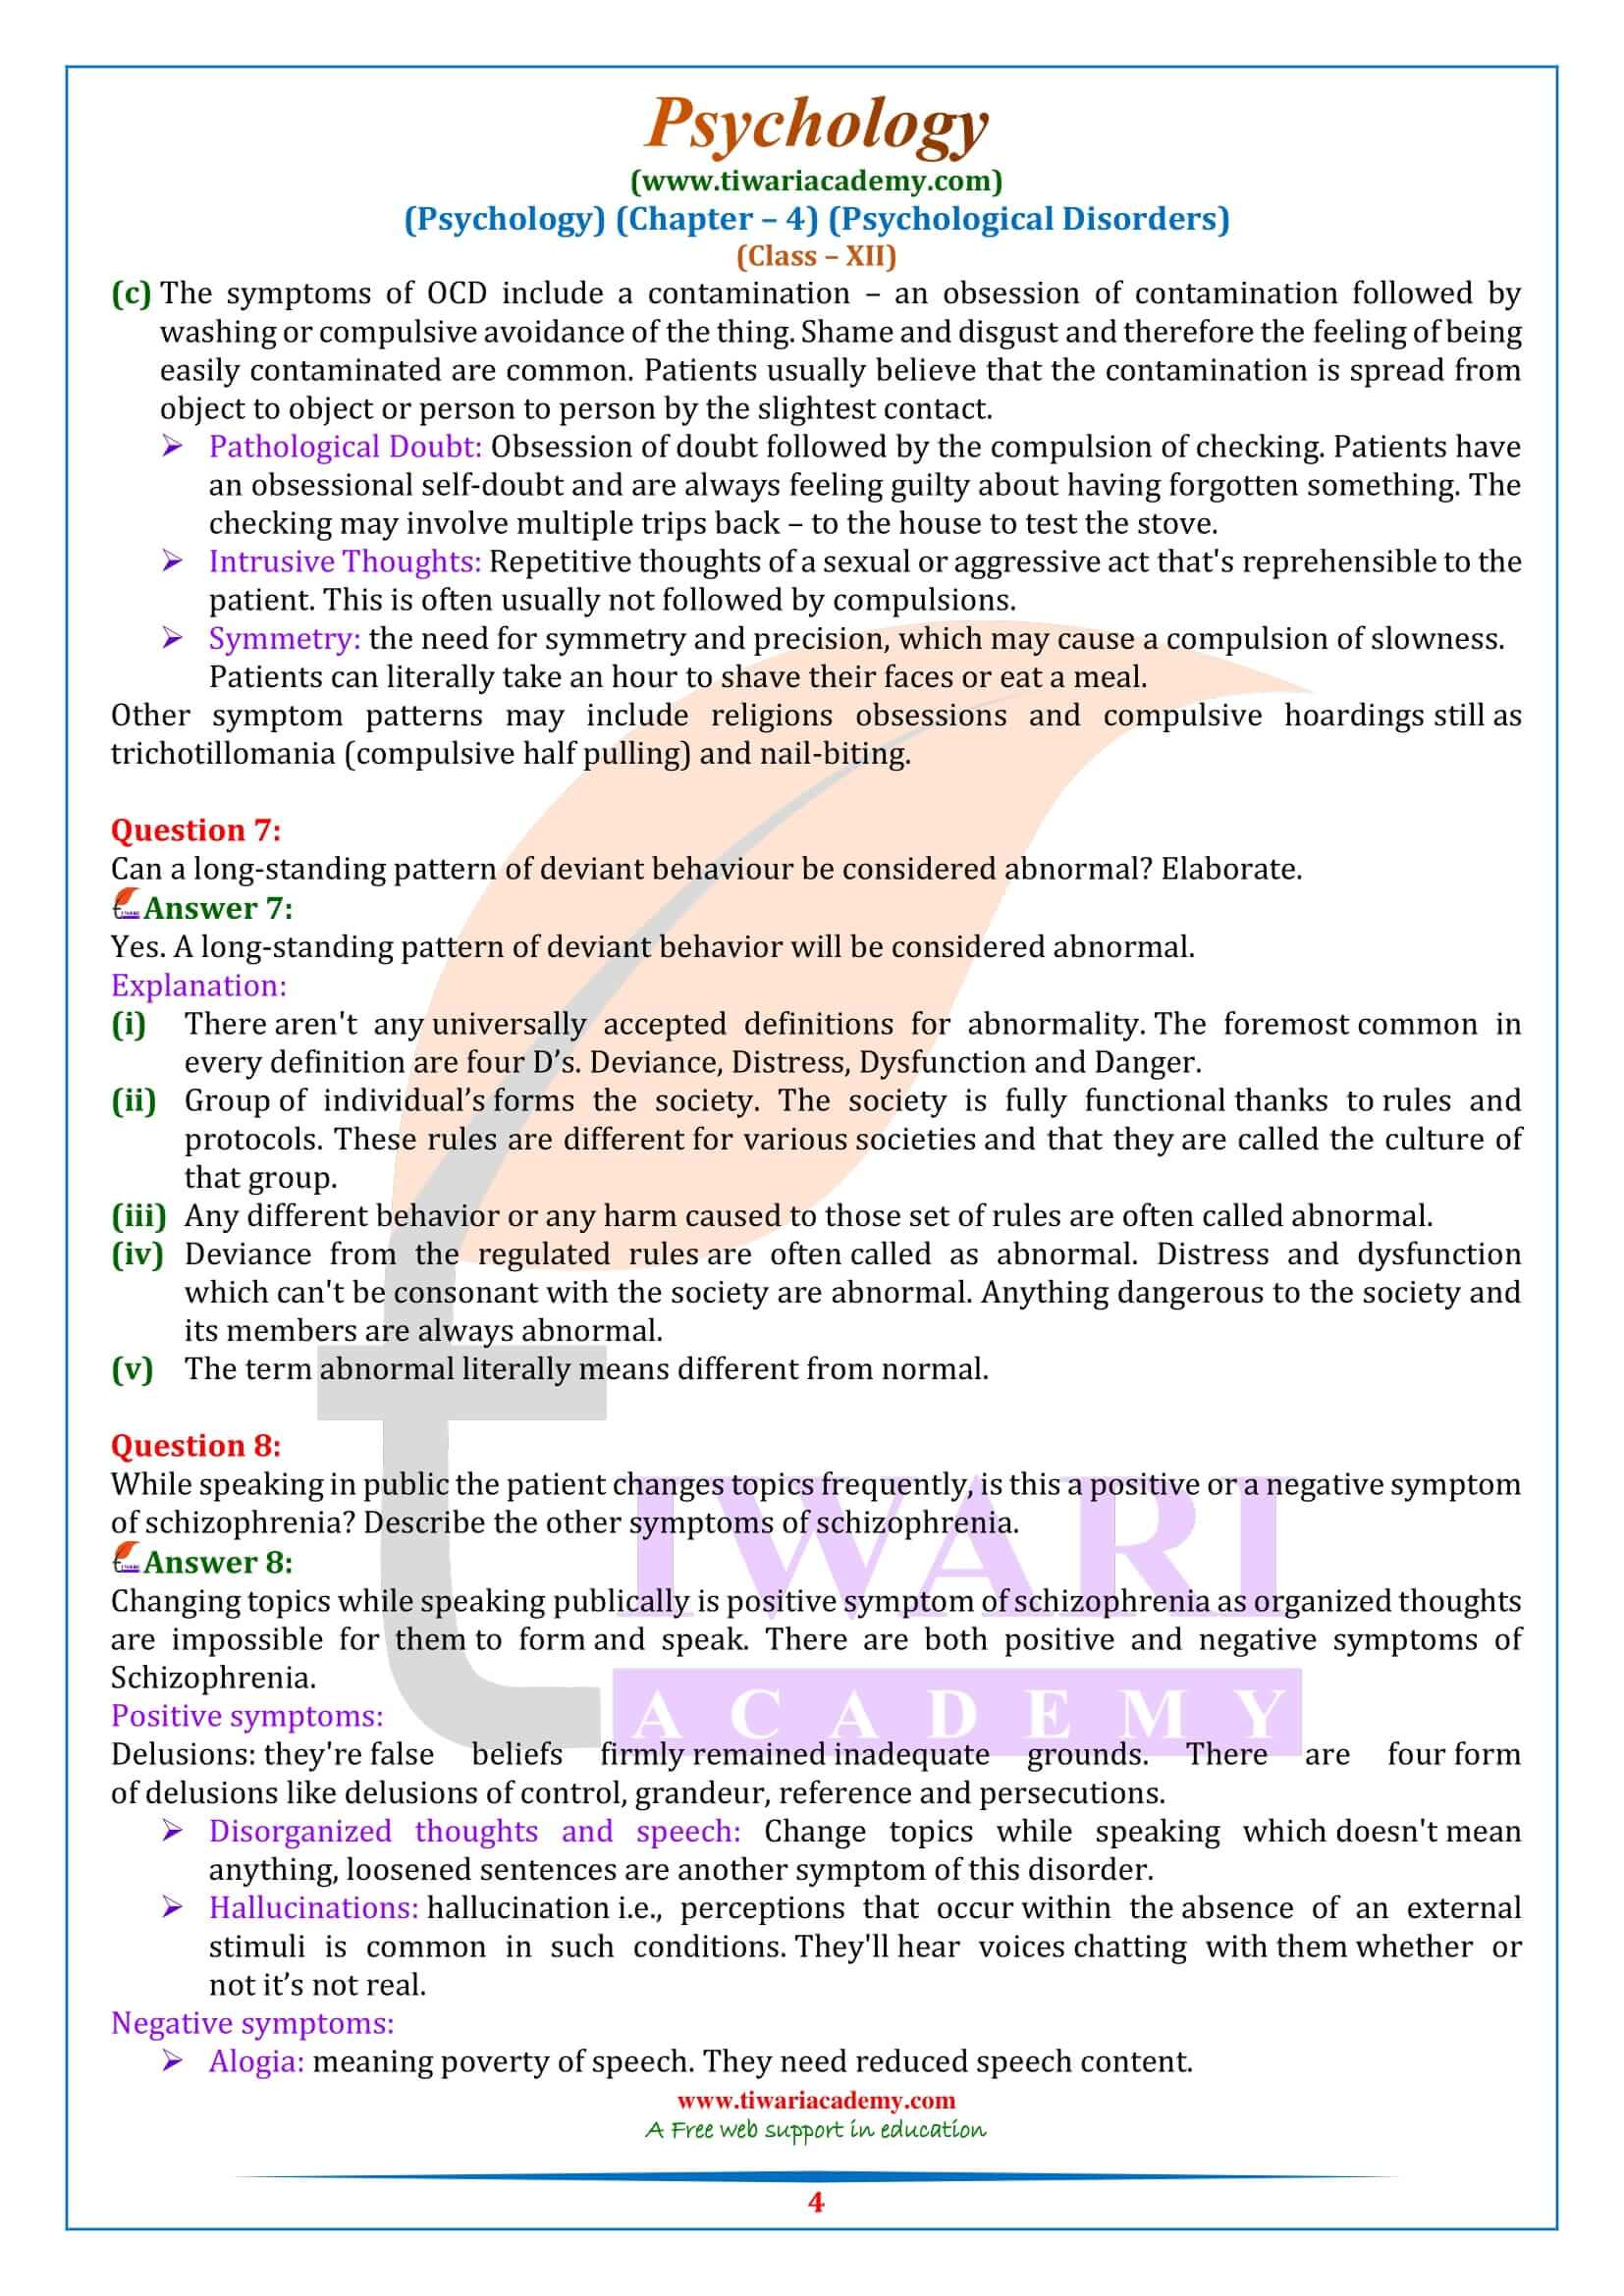 NCERT Solutions for Class 12 Psychology Chapter 4 in English Medium